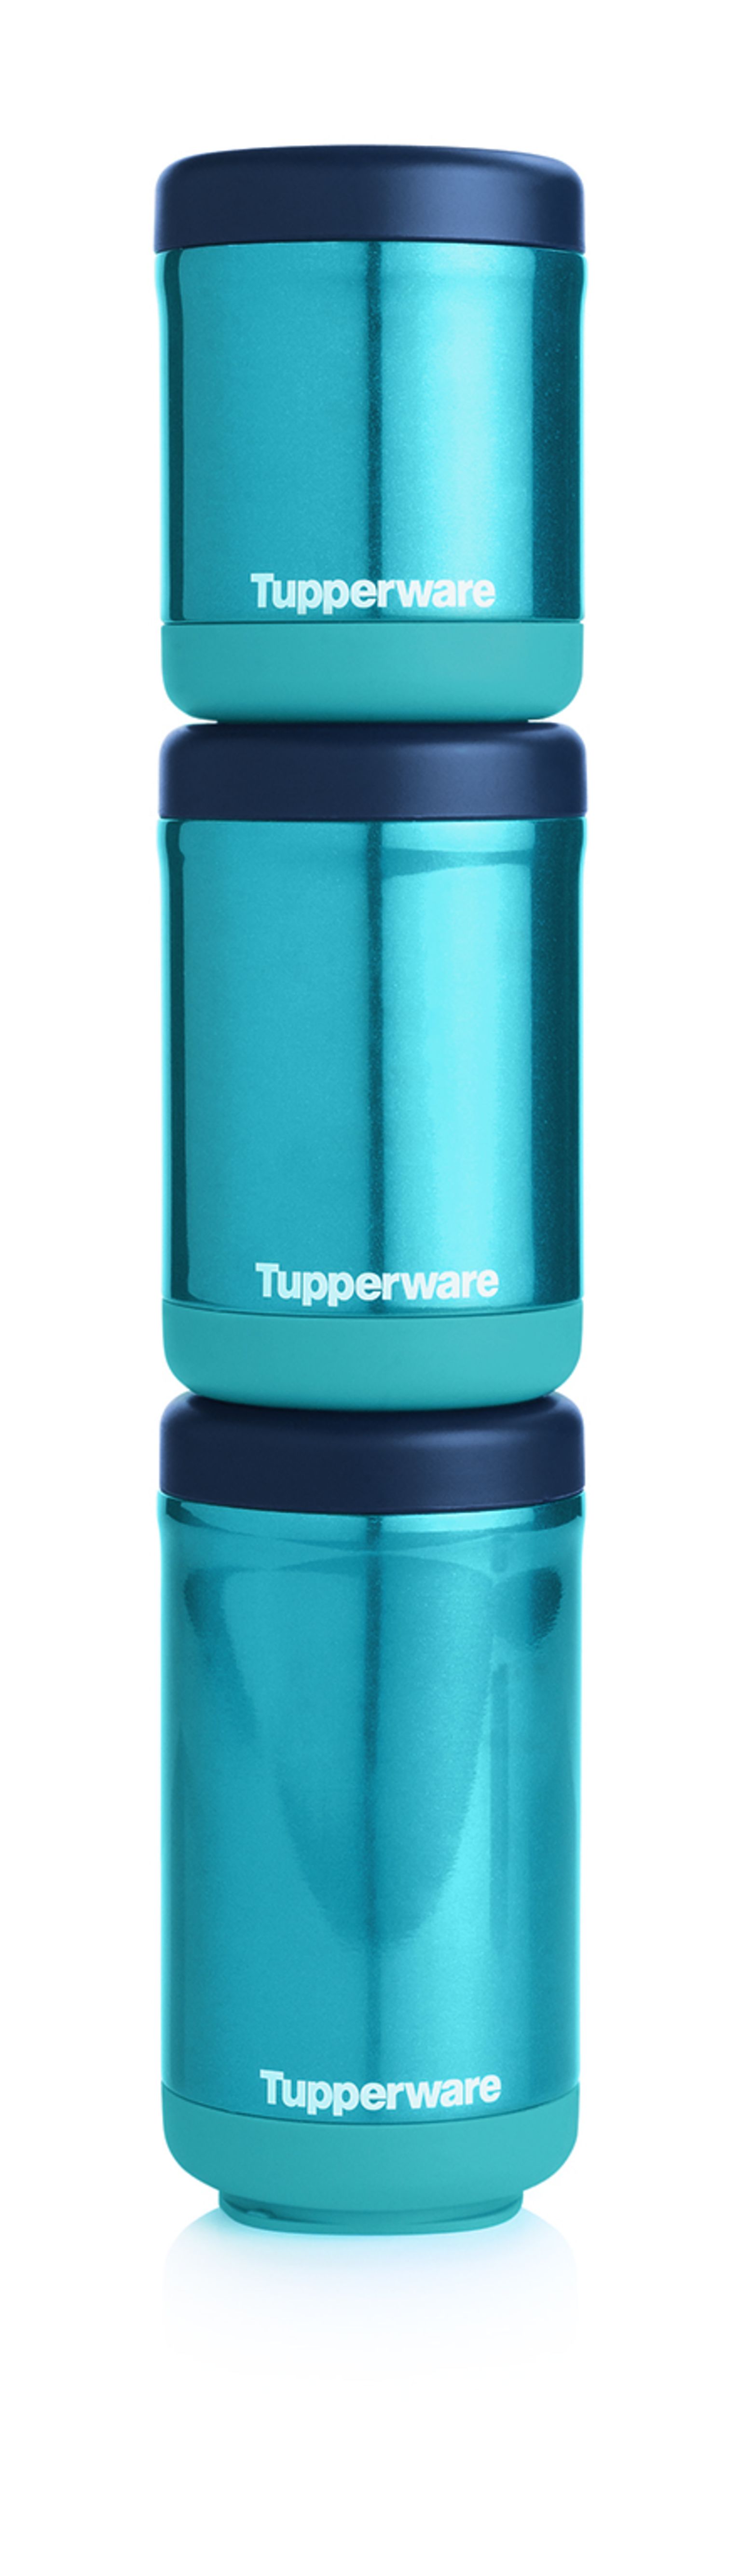 thermal stacking containers tupperware